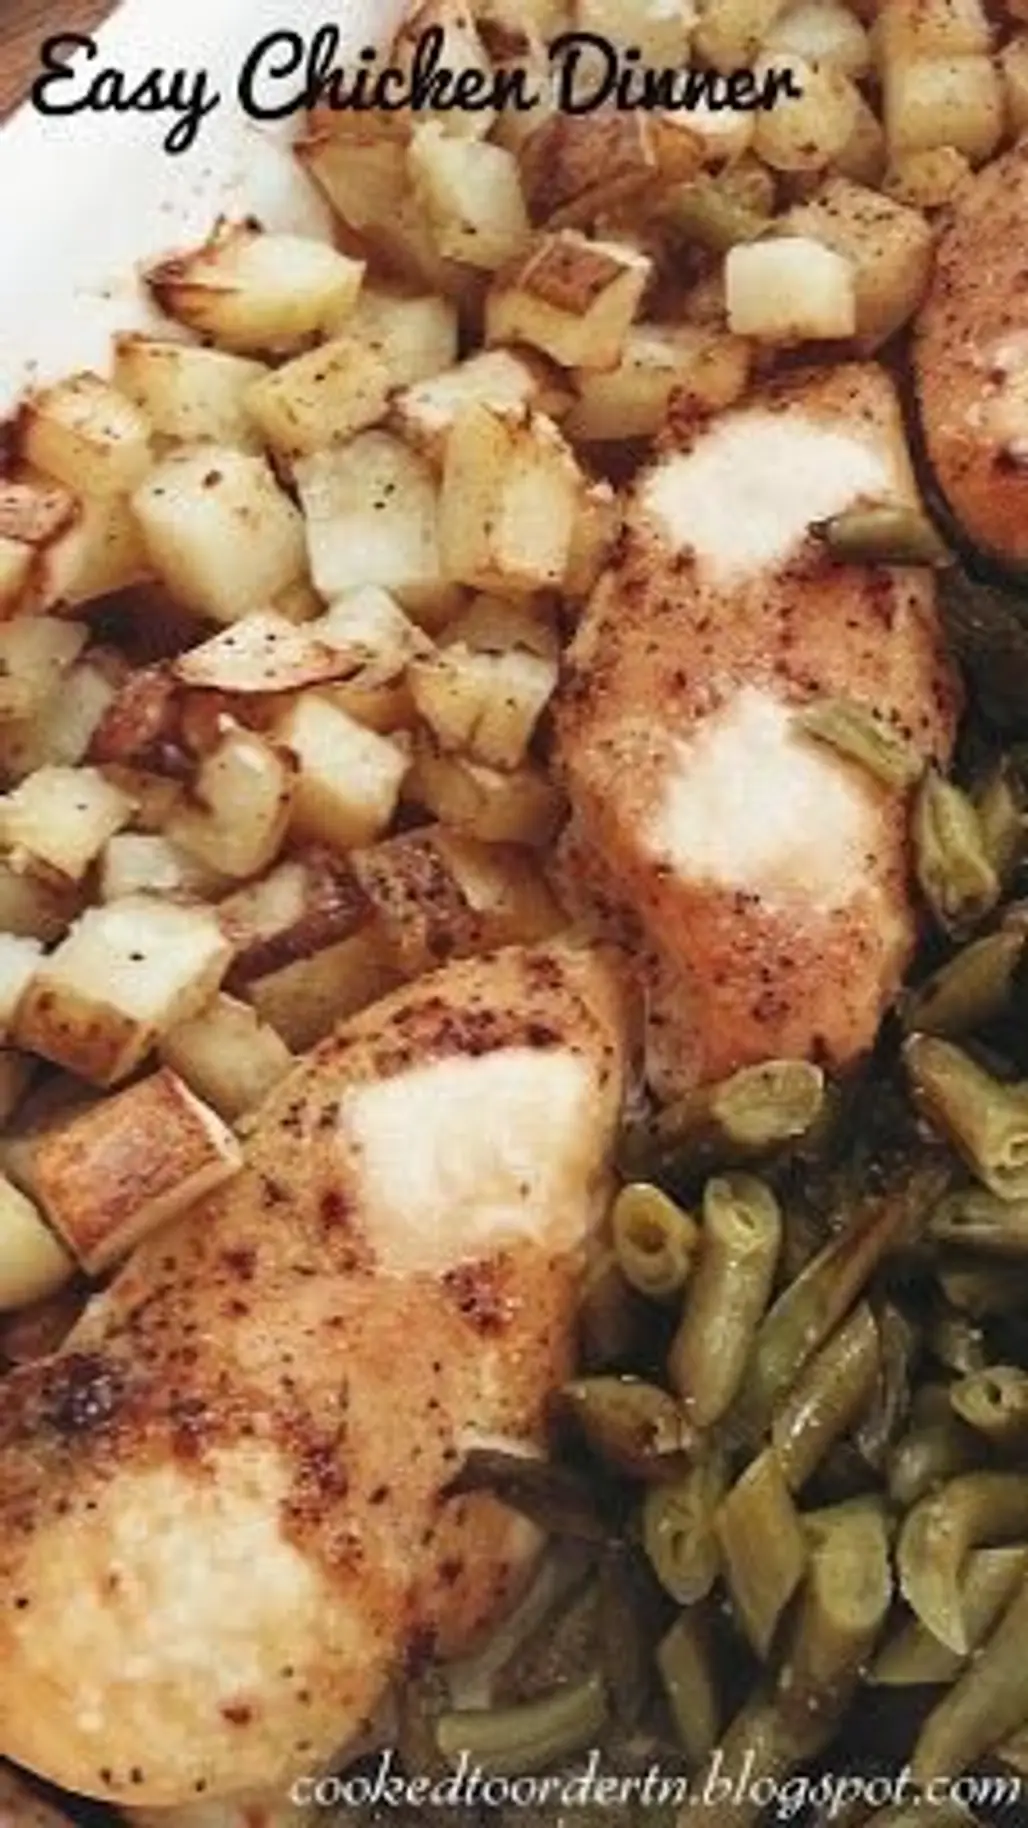 Chicken, Potatoes and Green Beans